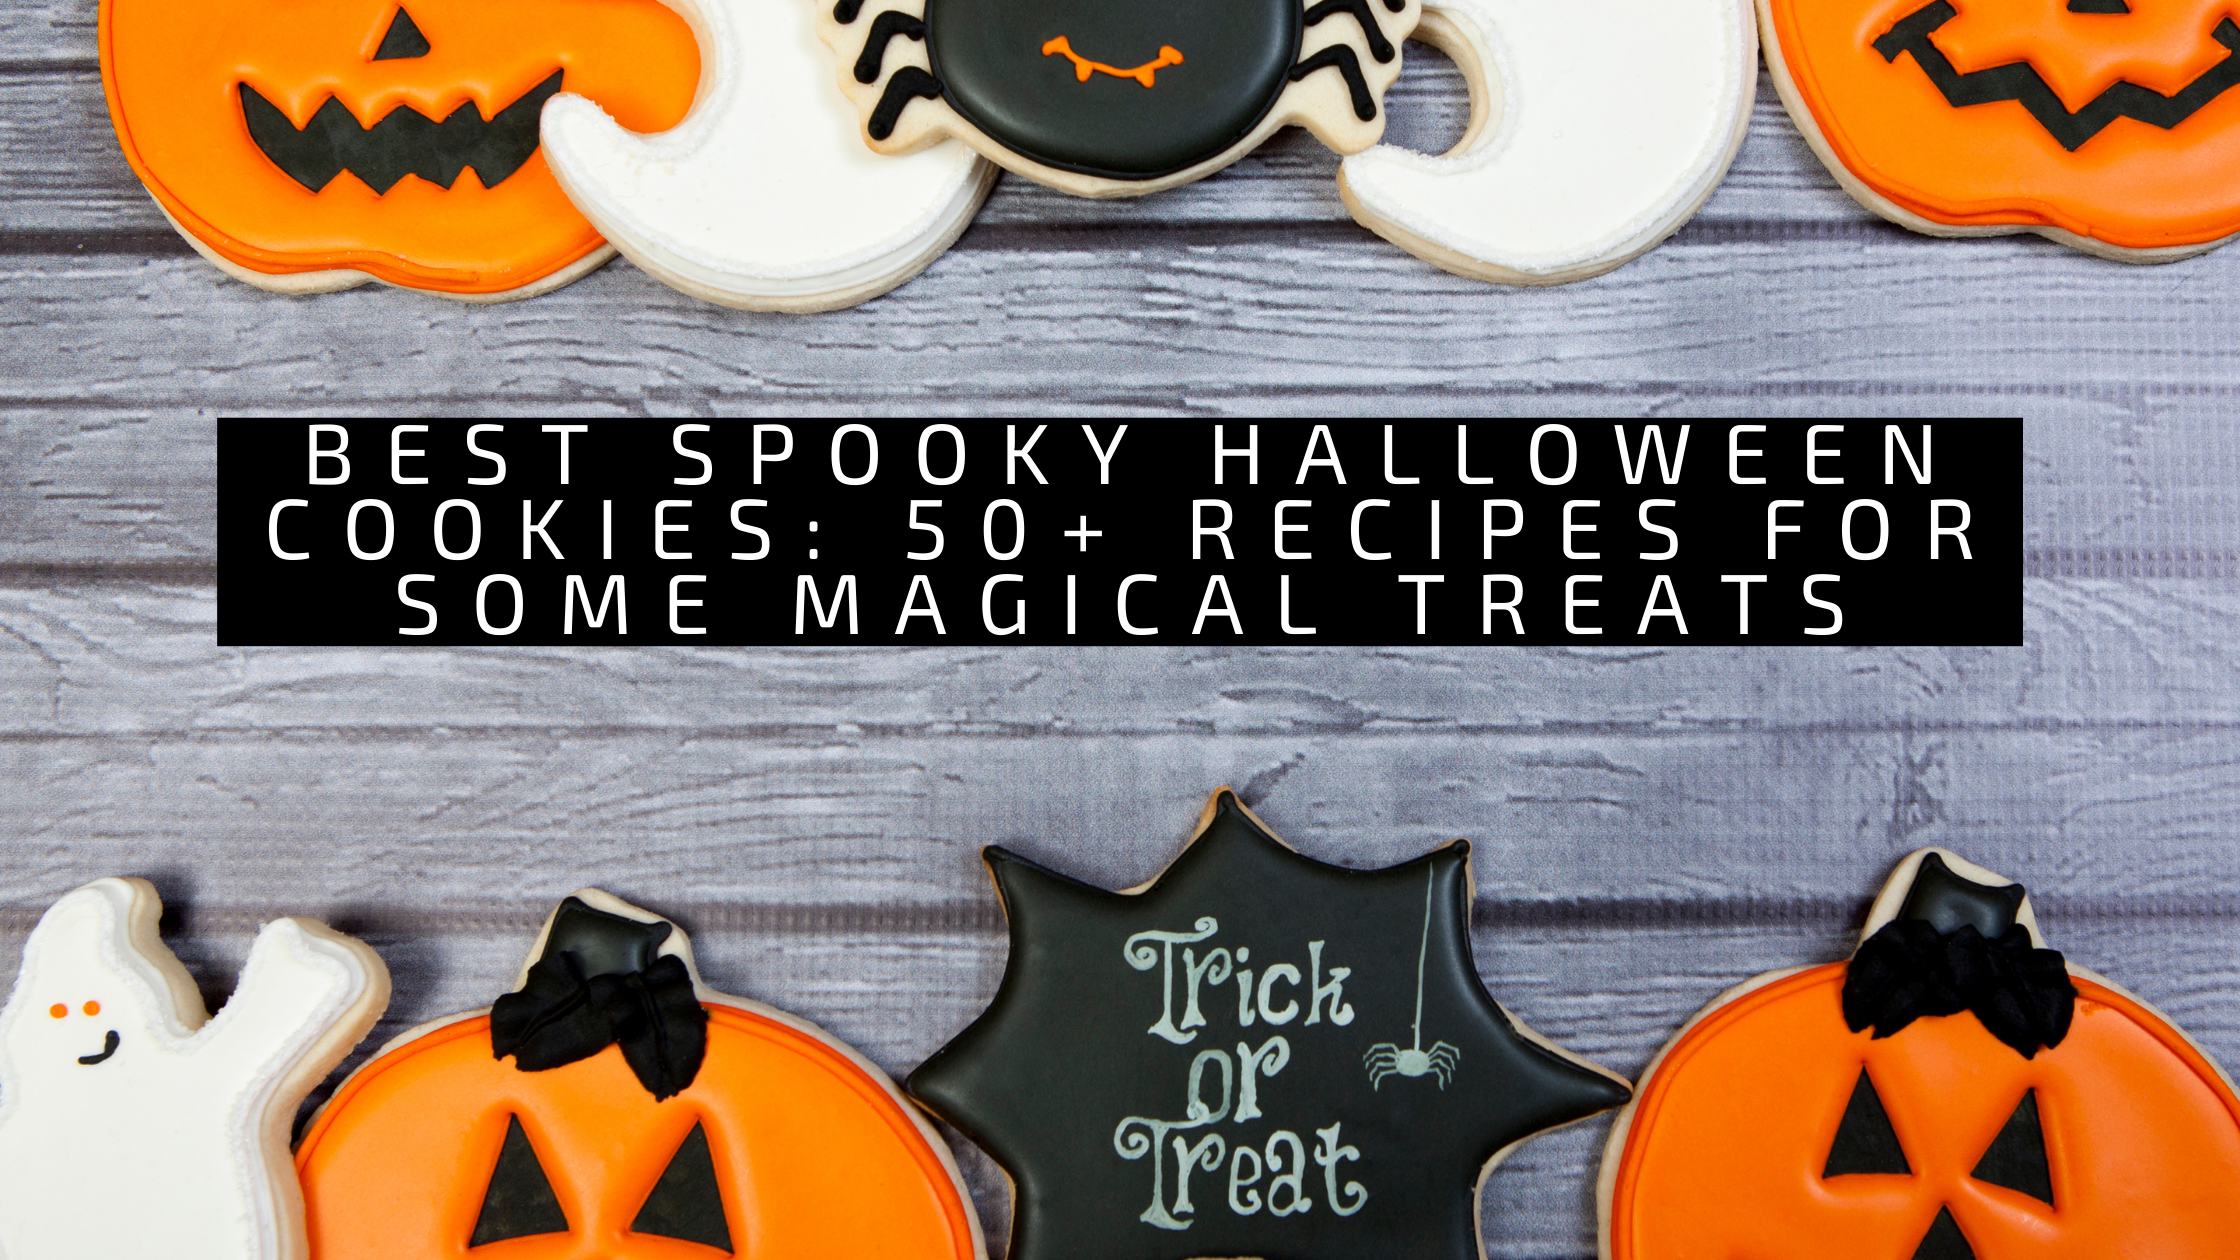 Best Spooky Halloween Cookies: 50+ Recipes for Some Magical Treats 5